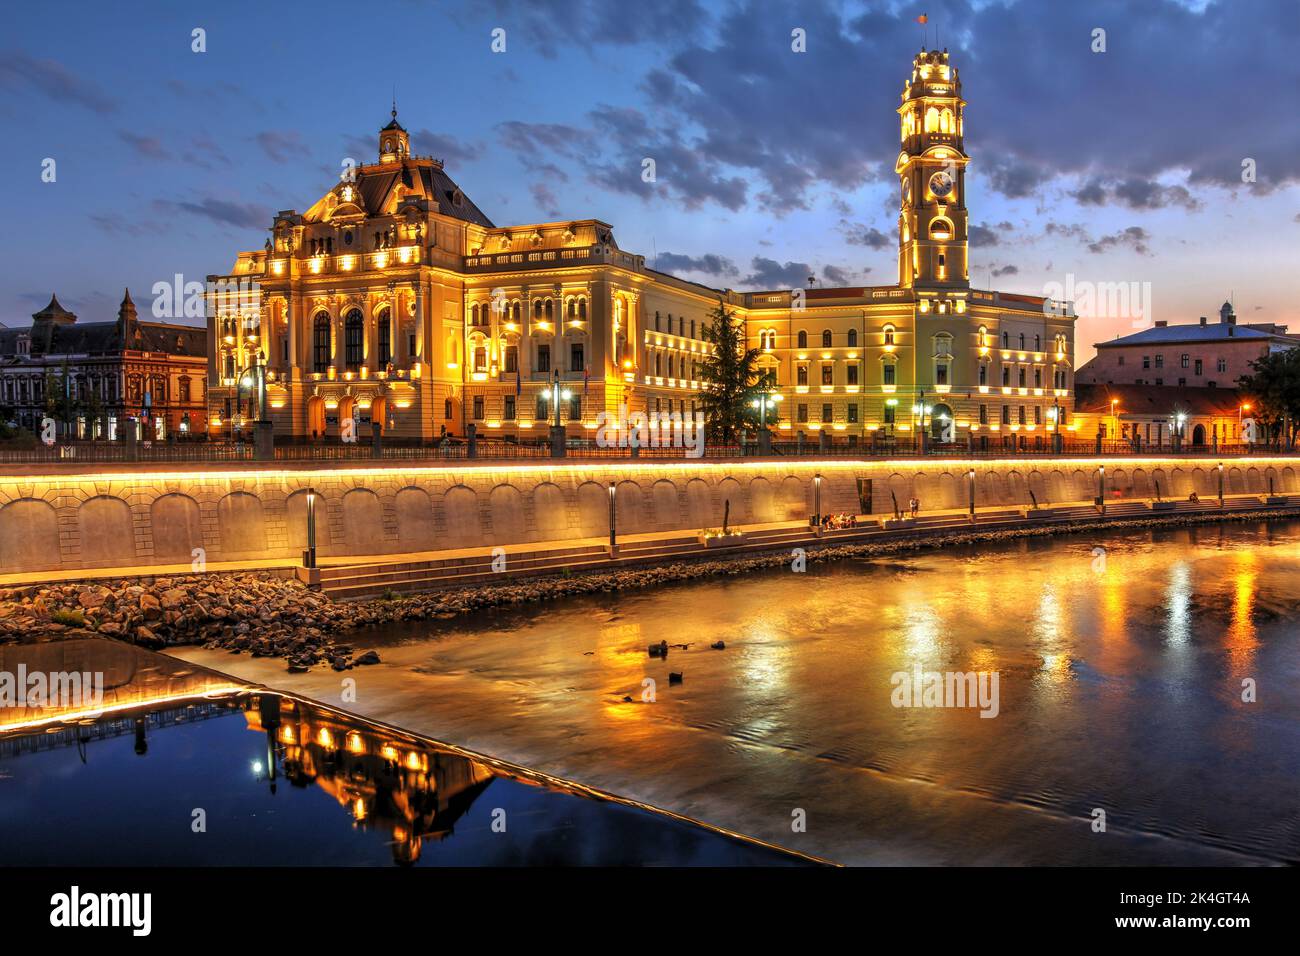 Eclectic style City Hall Palace in Oradea, Romania mirrored in the Rapid Cris river (Crisul Repede) at night. Stock Photo